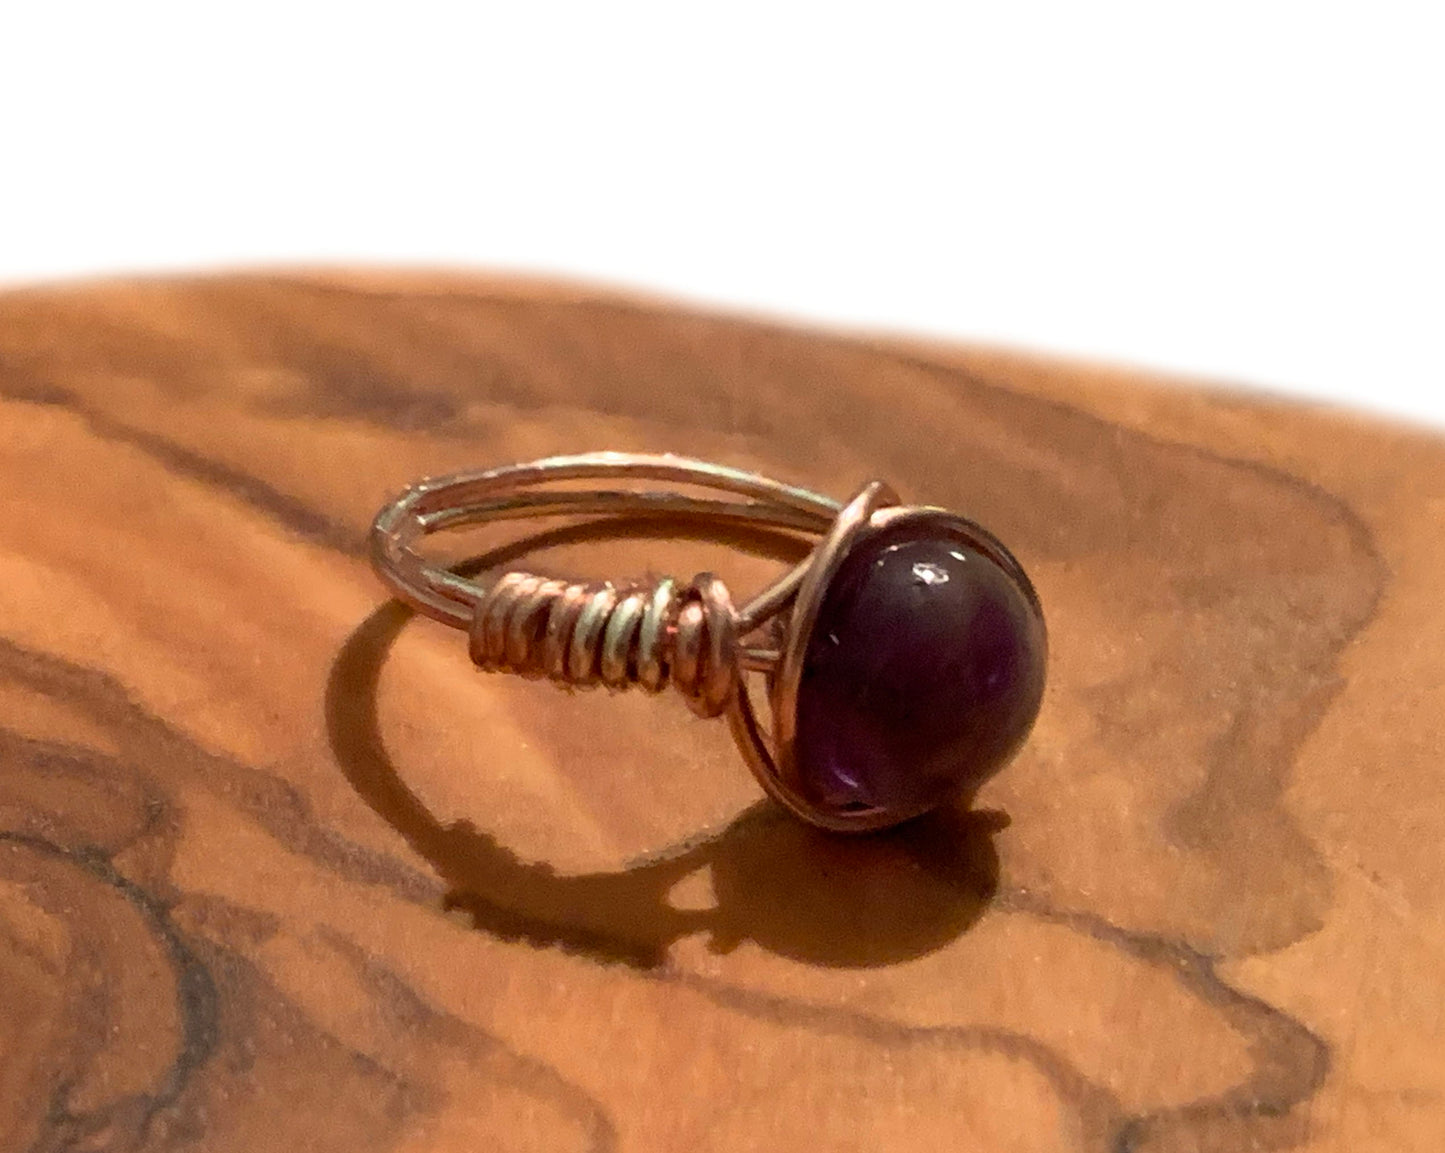 Rosalinda Handmade Amethyst and Rose Gold Wire Wrapped Ring Size 6.5